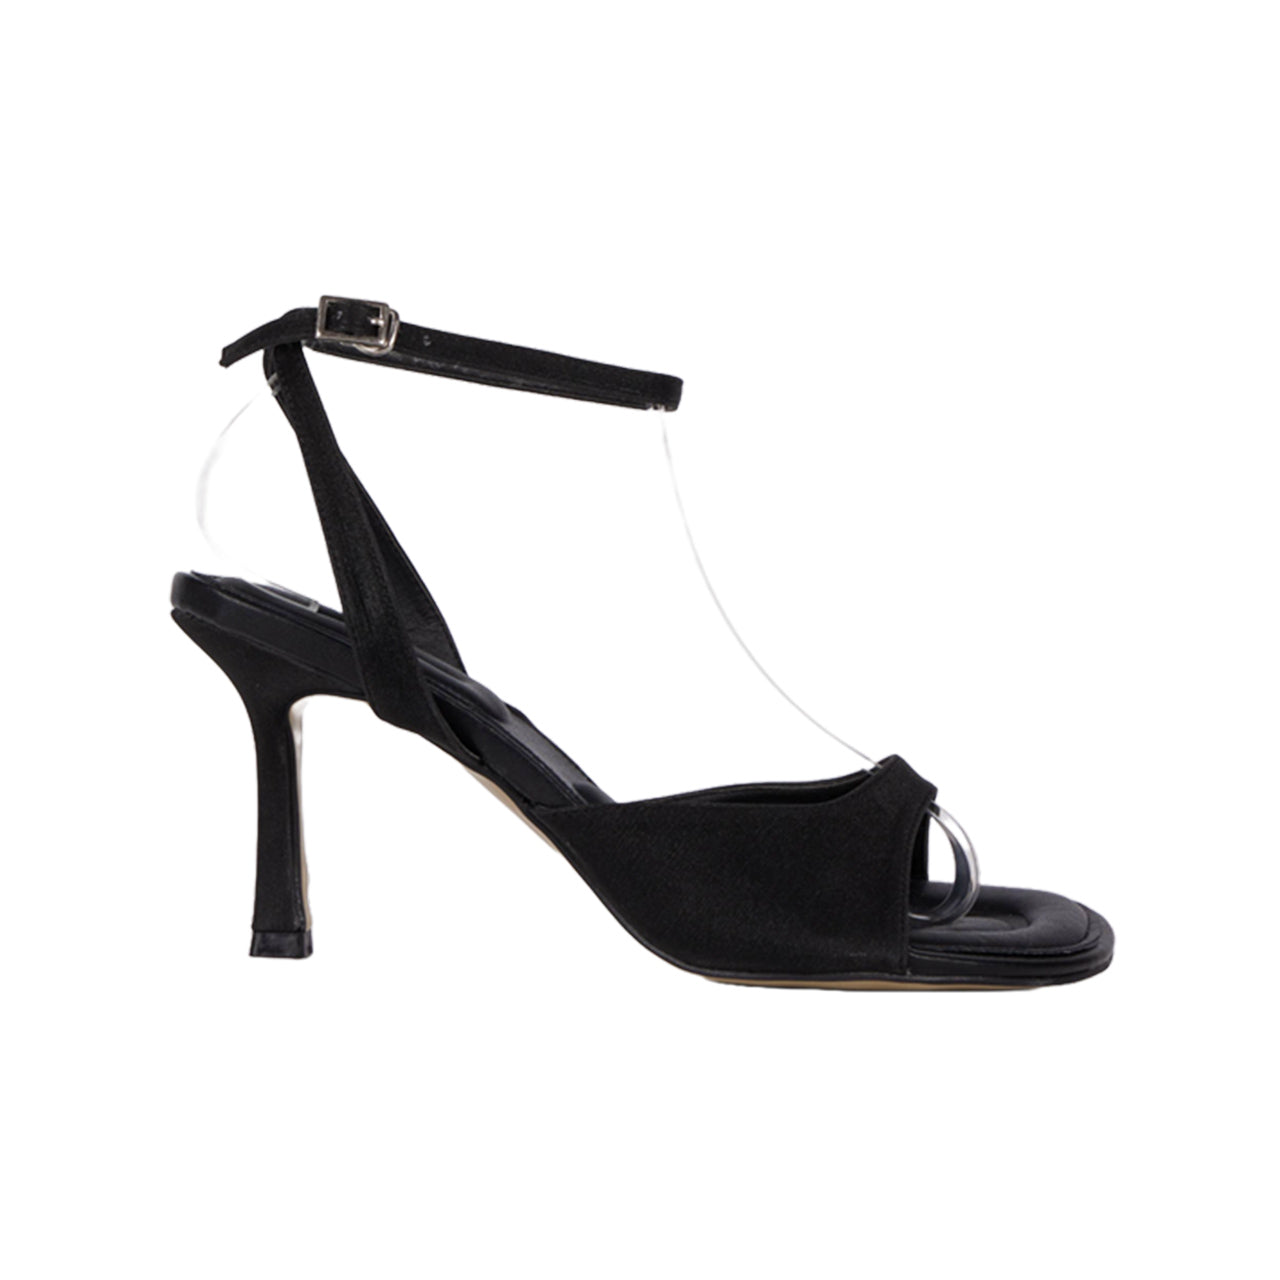 AR-3298 Strappy Heeled Sandals